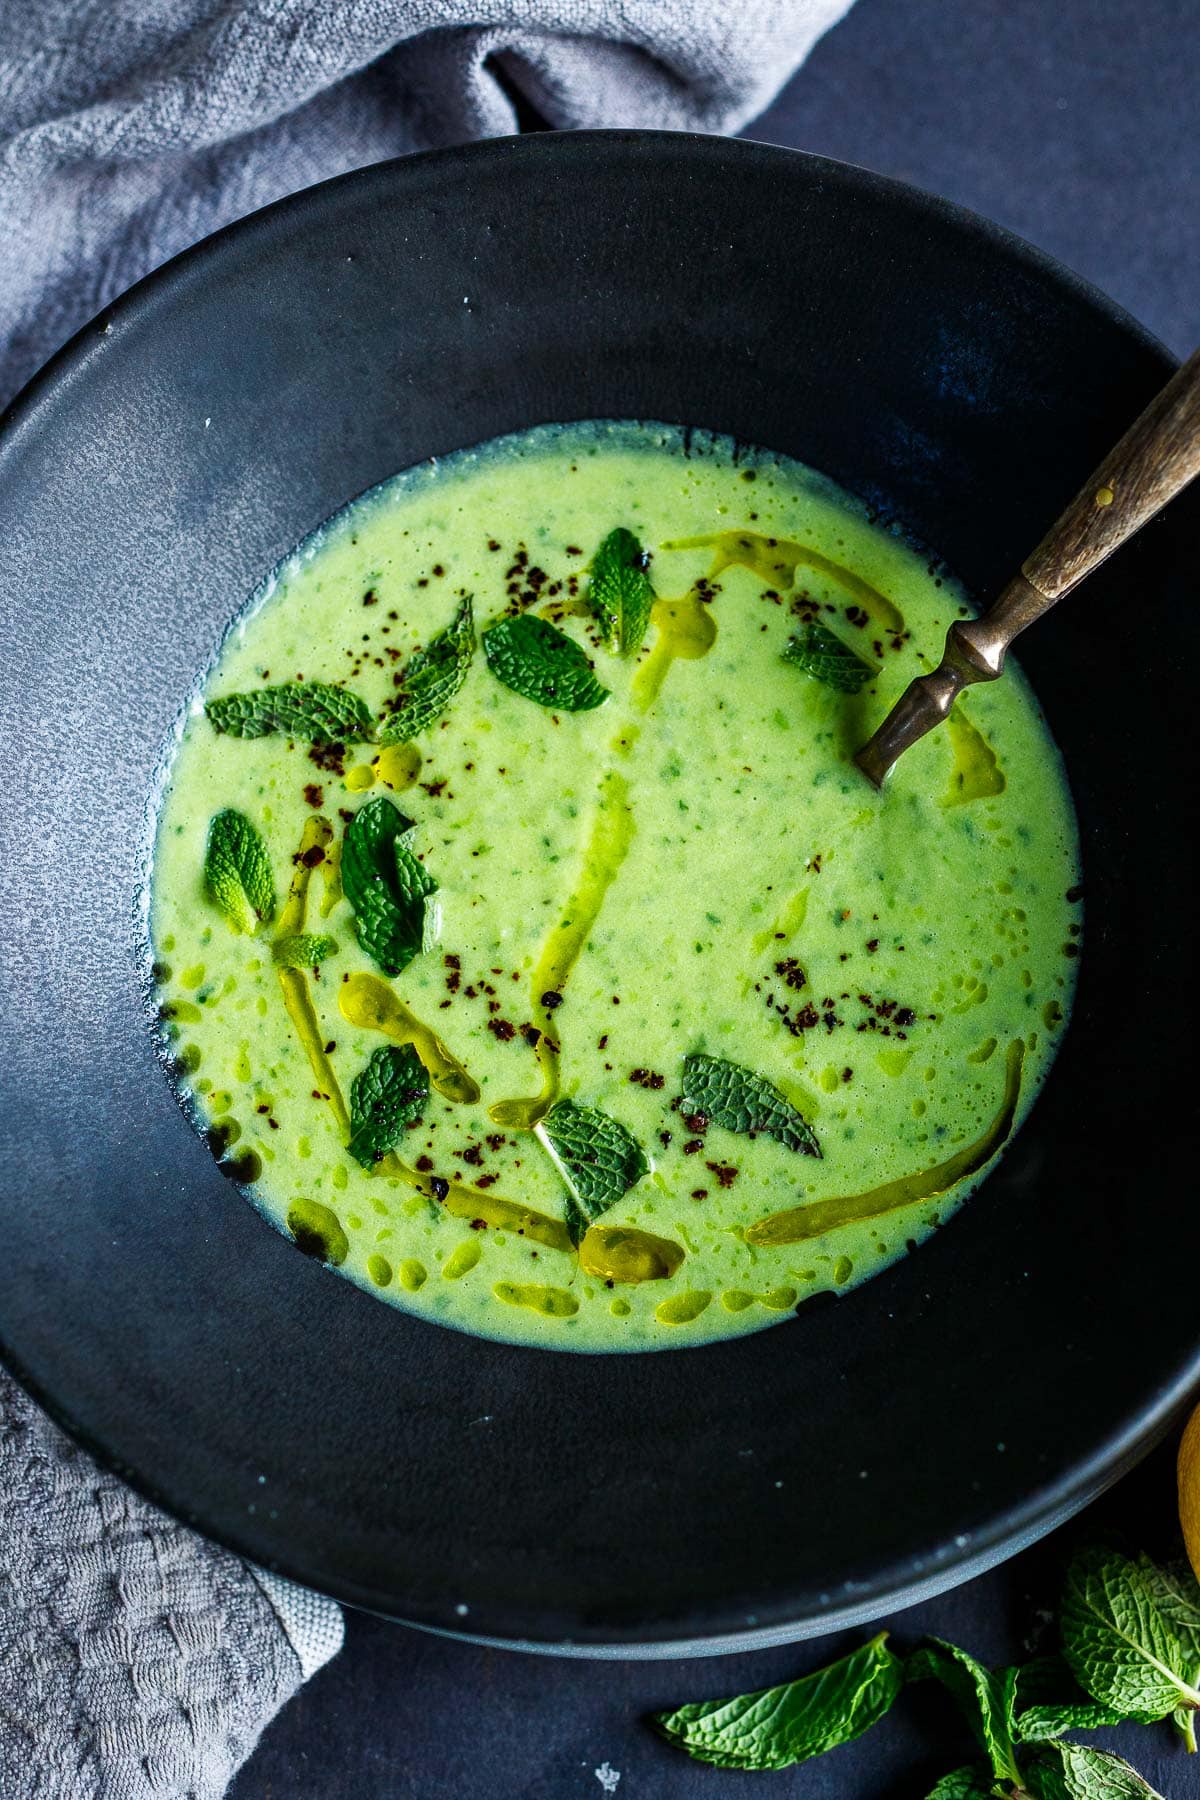 minted pea soup in serving bowl with spoon, green hue, and garnished with truffle oil, fresh mint, and urfa biber.